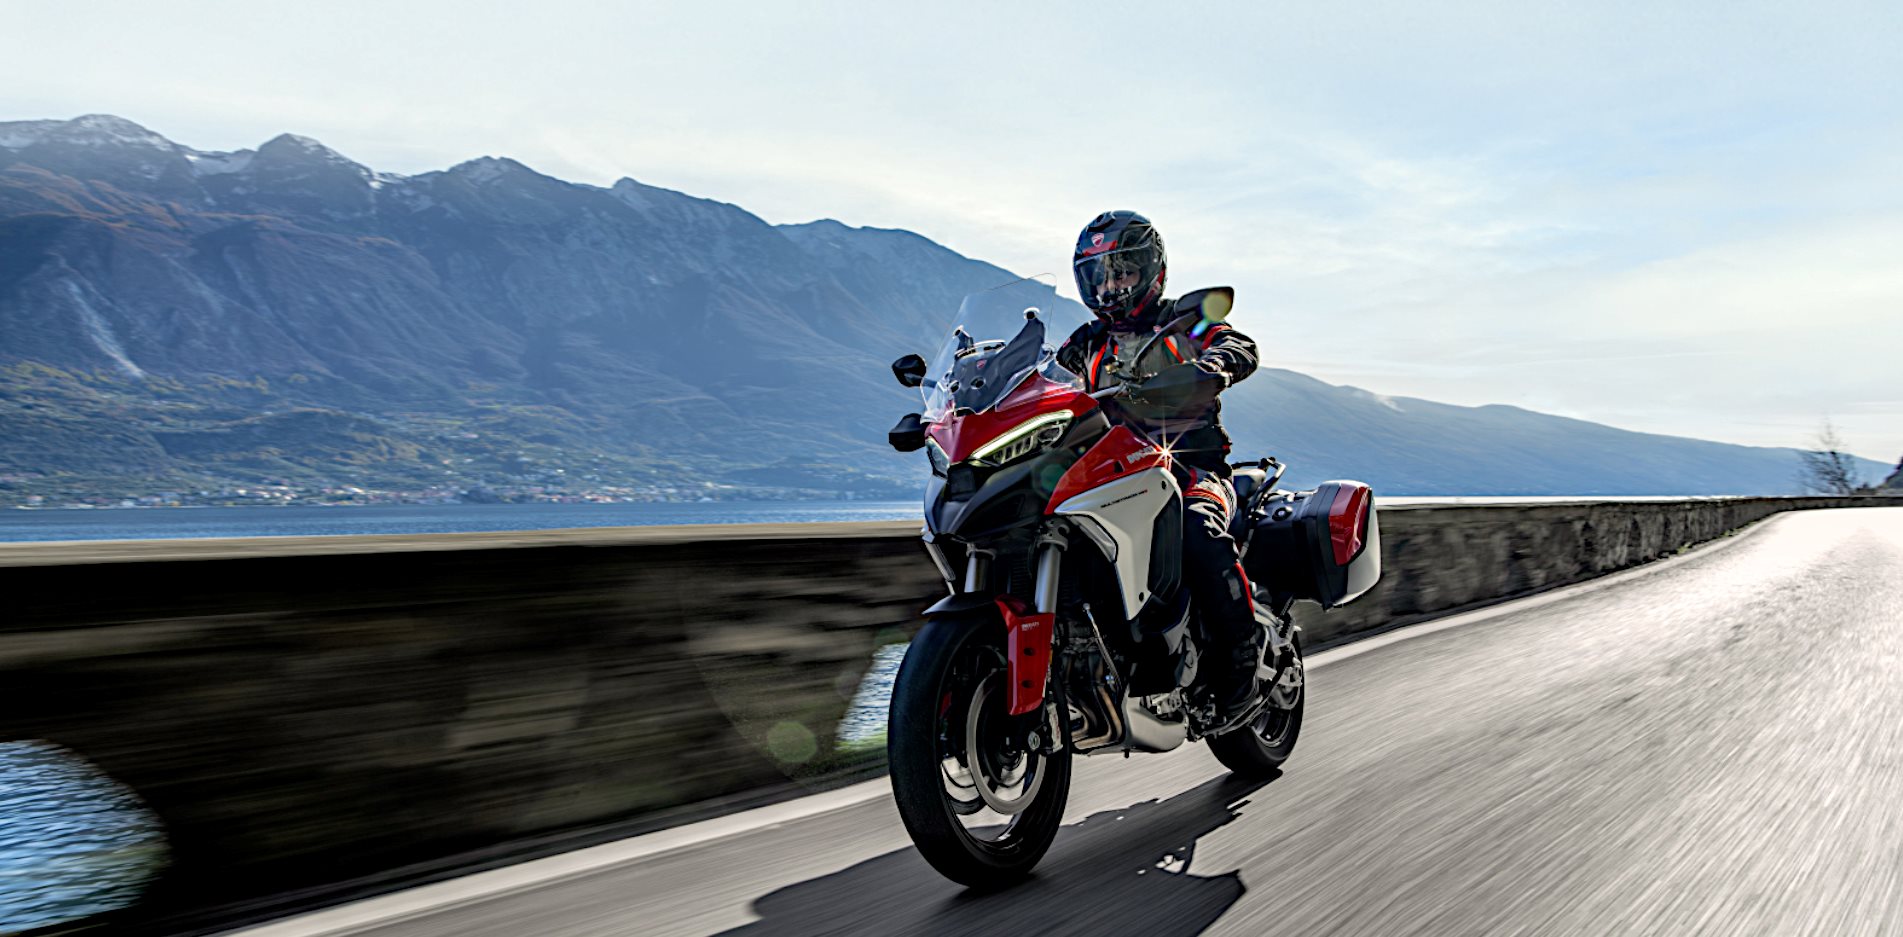 The fourth Multistrada generation. Sportier and more touring, stronger in off-road use and easier in urban action.